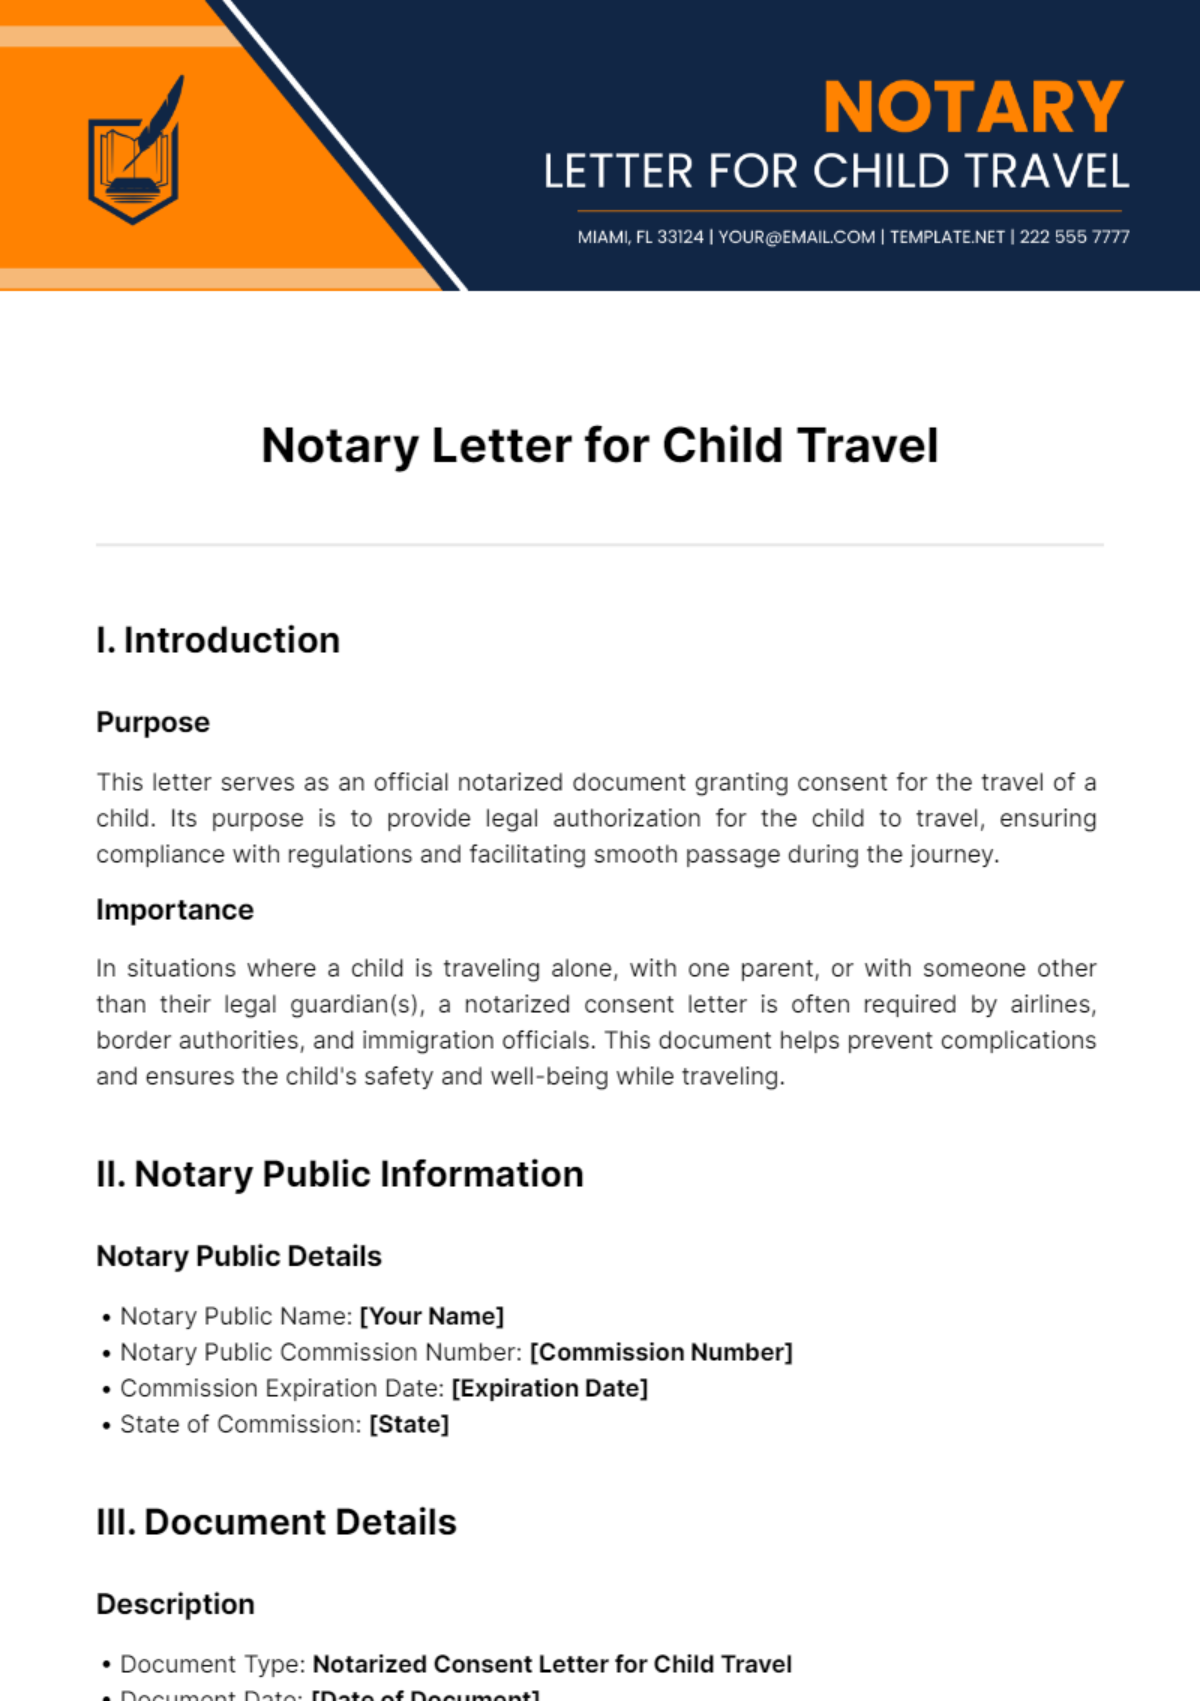 Notary Letter for Child Travel Template